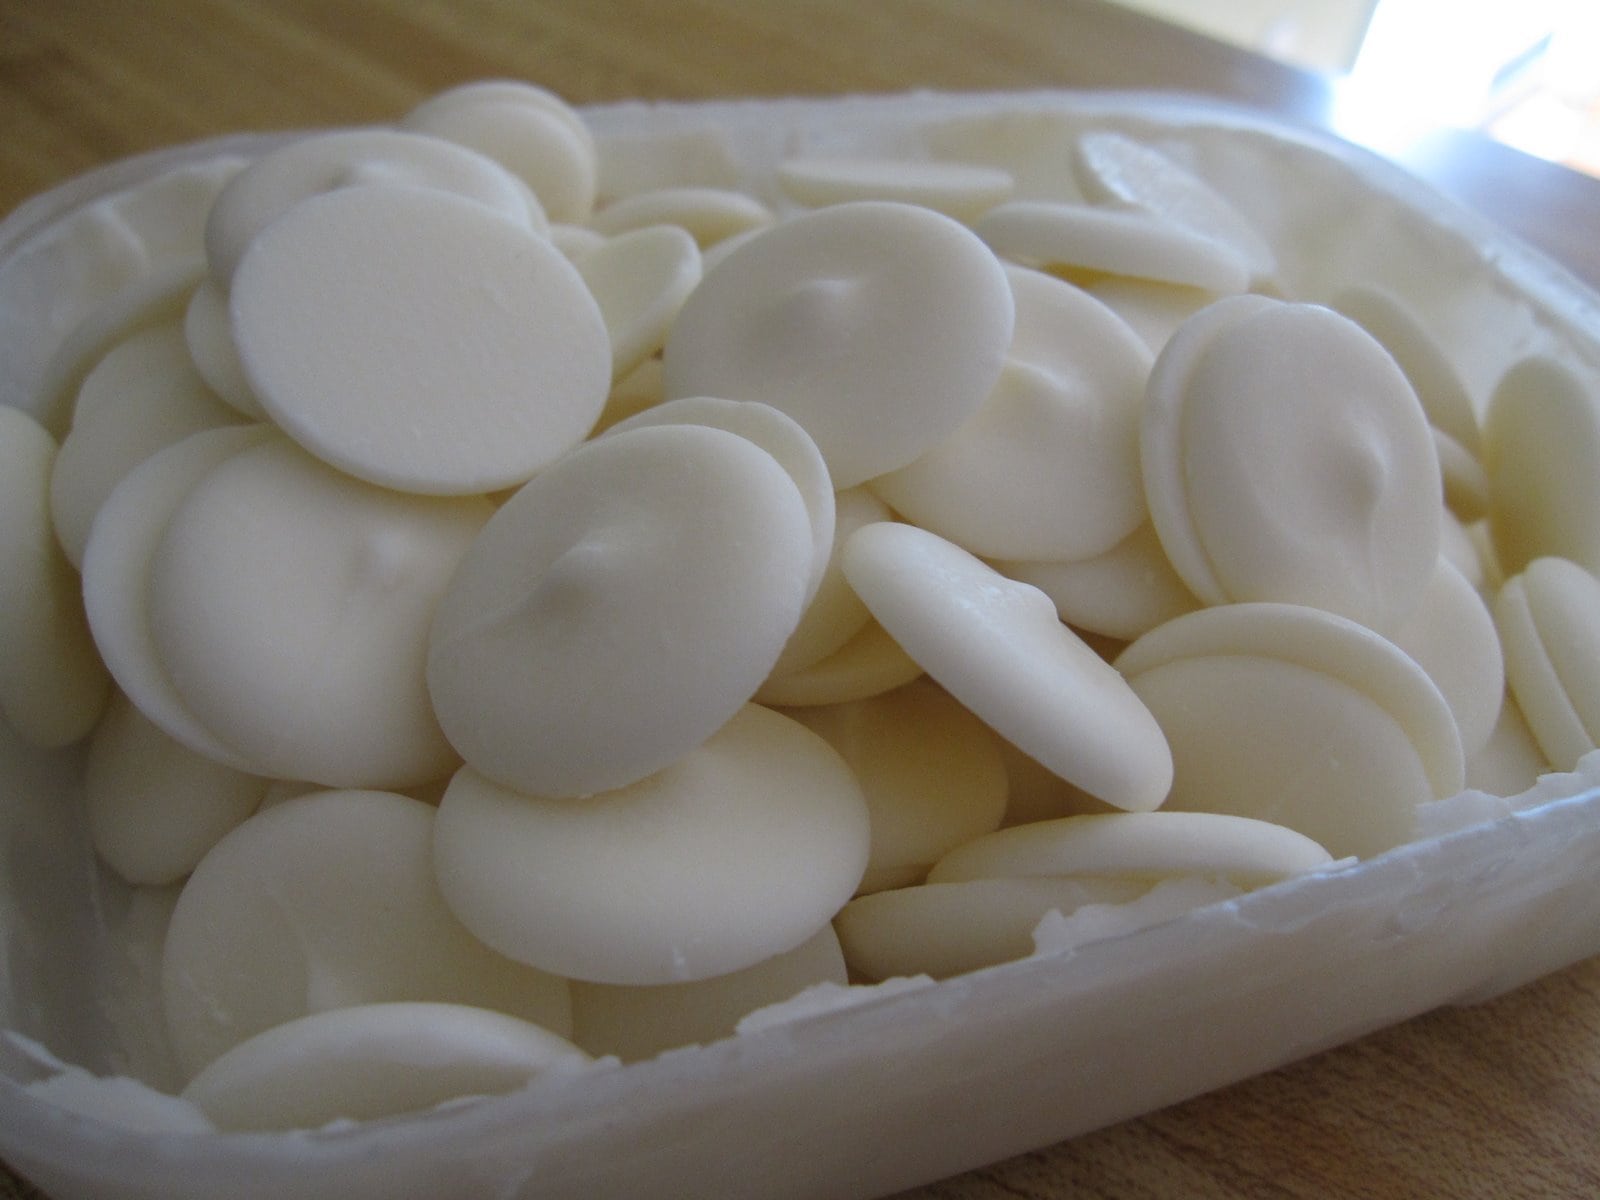 A bowl of white candy disks